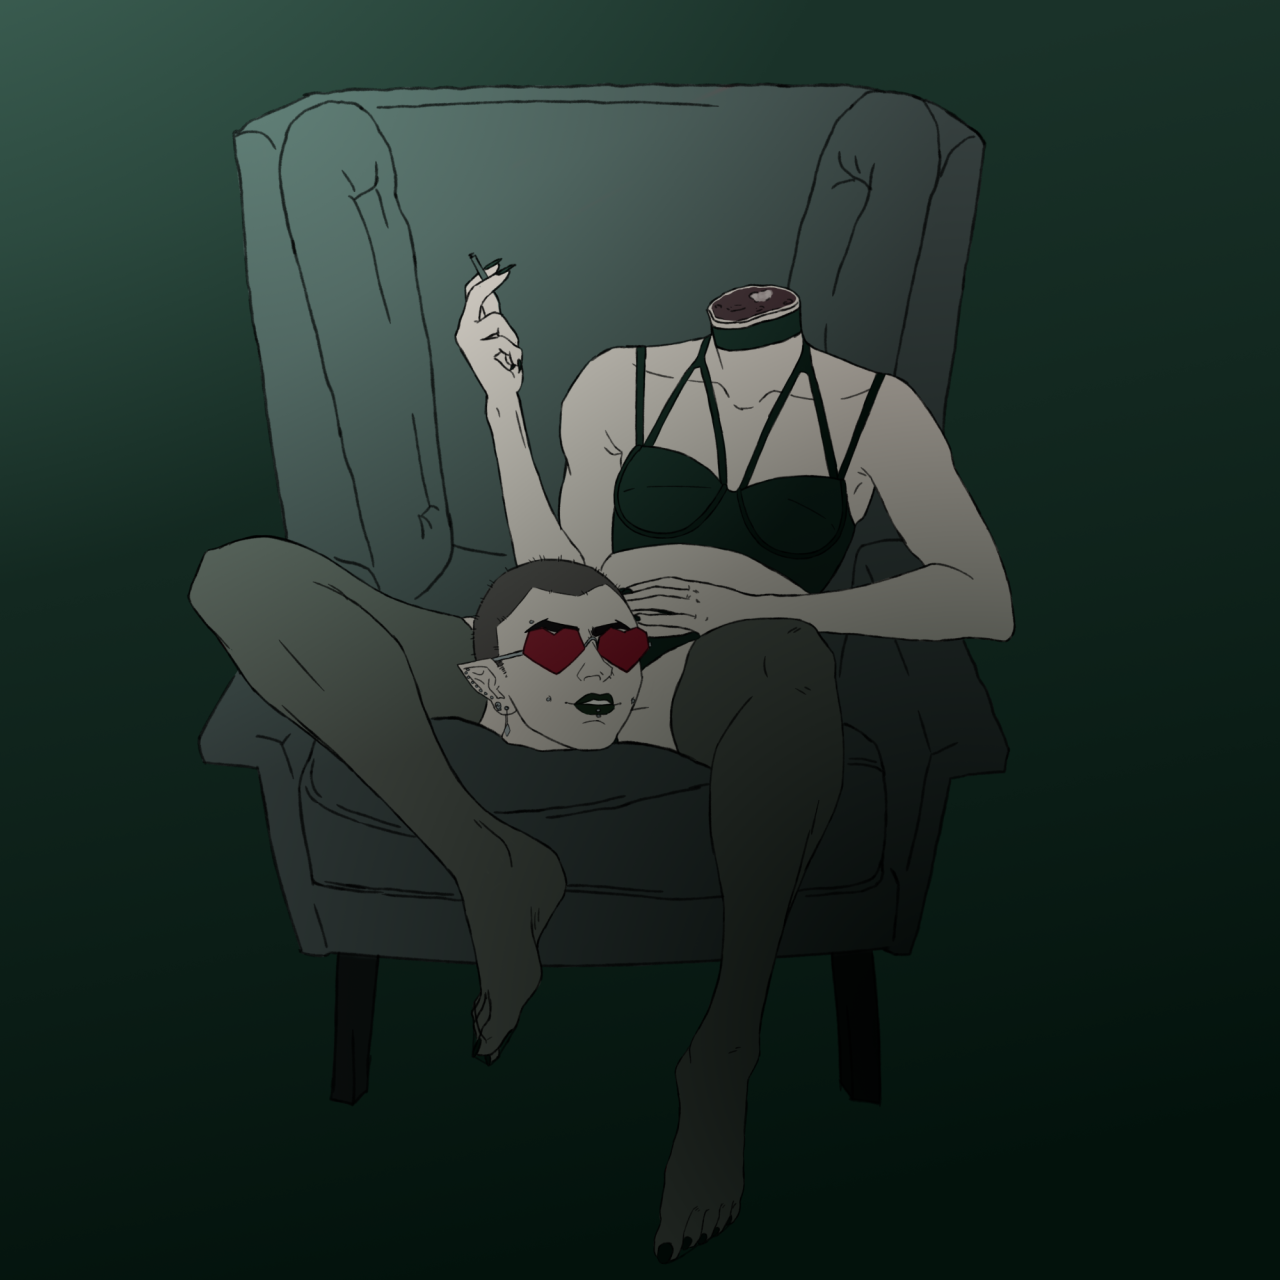 A digital sketch of  a Dullahan. It is humanoid and pale-skinned and is sitting in a plush grey chair with its severed head between its thighs, facing the viewer. It is wearing a dark green brassier, panties and choker, and semi-transparent thigh-high stockings. It is holding a cigarette in its right hand, and has red, heart-shaped lens sunglases on its face. The background is a dark green gradient.